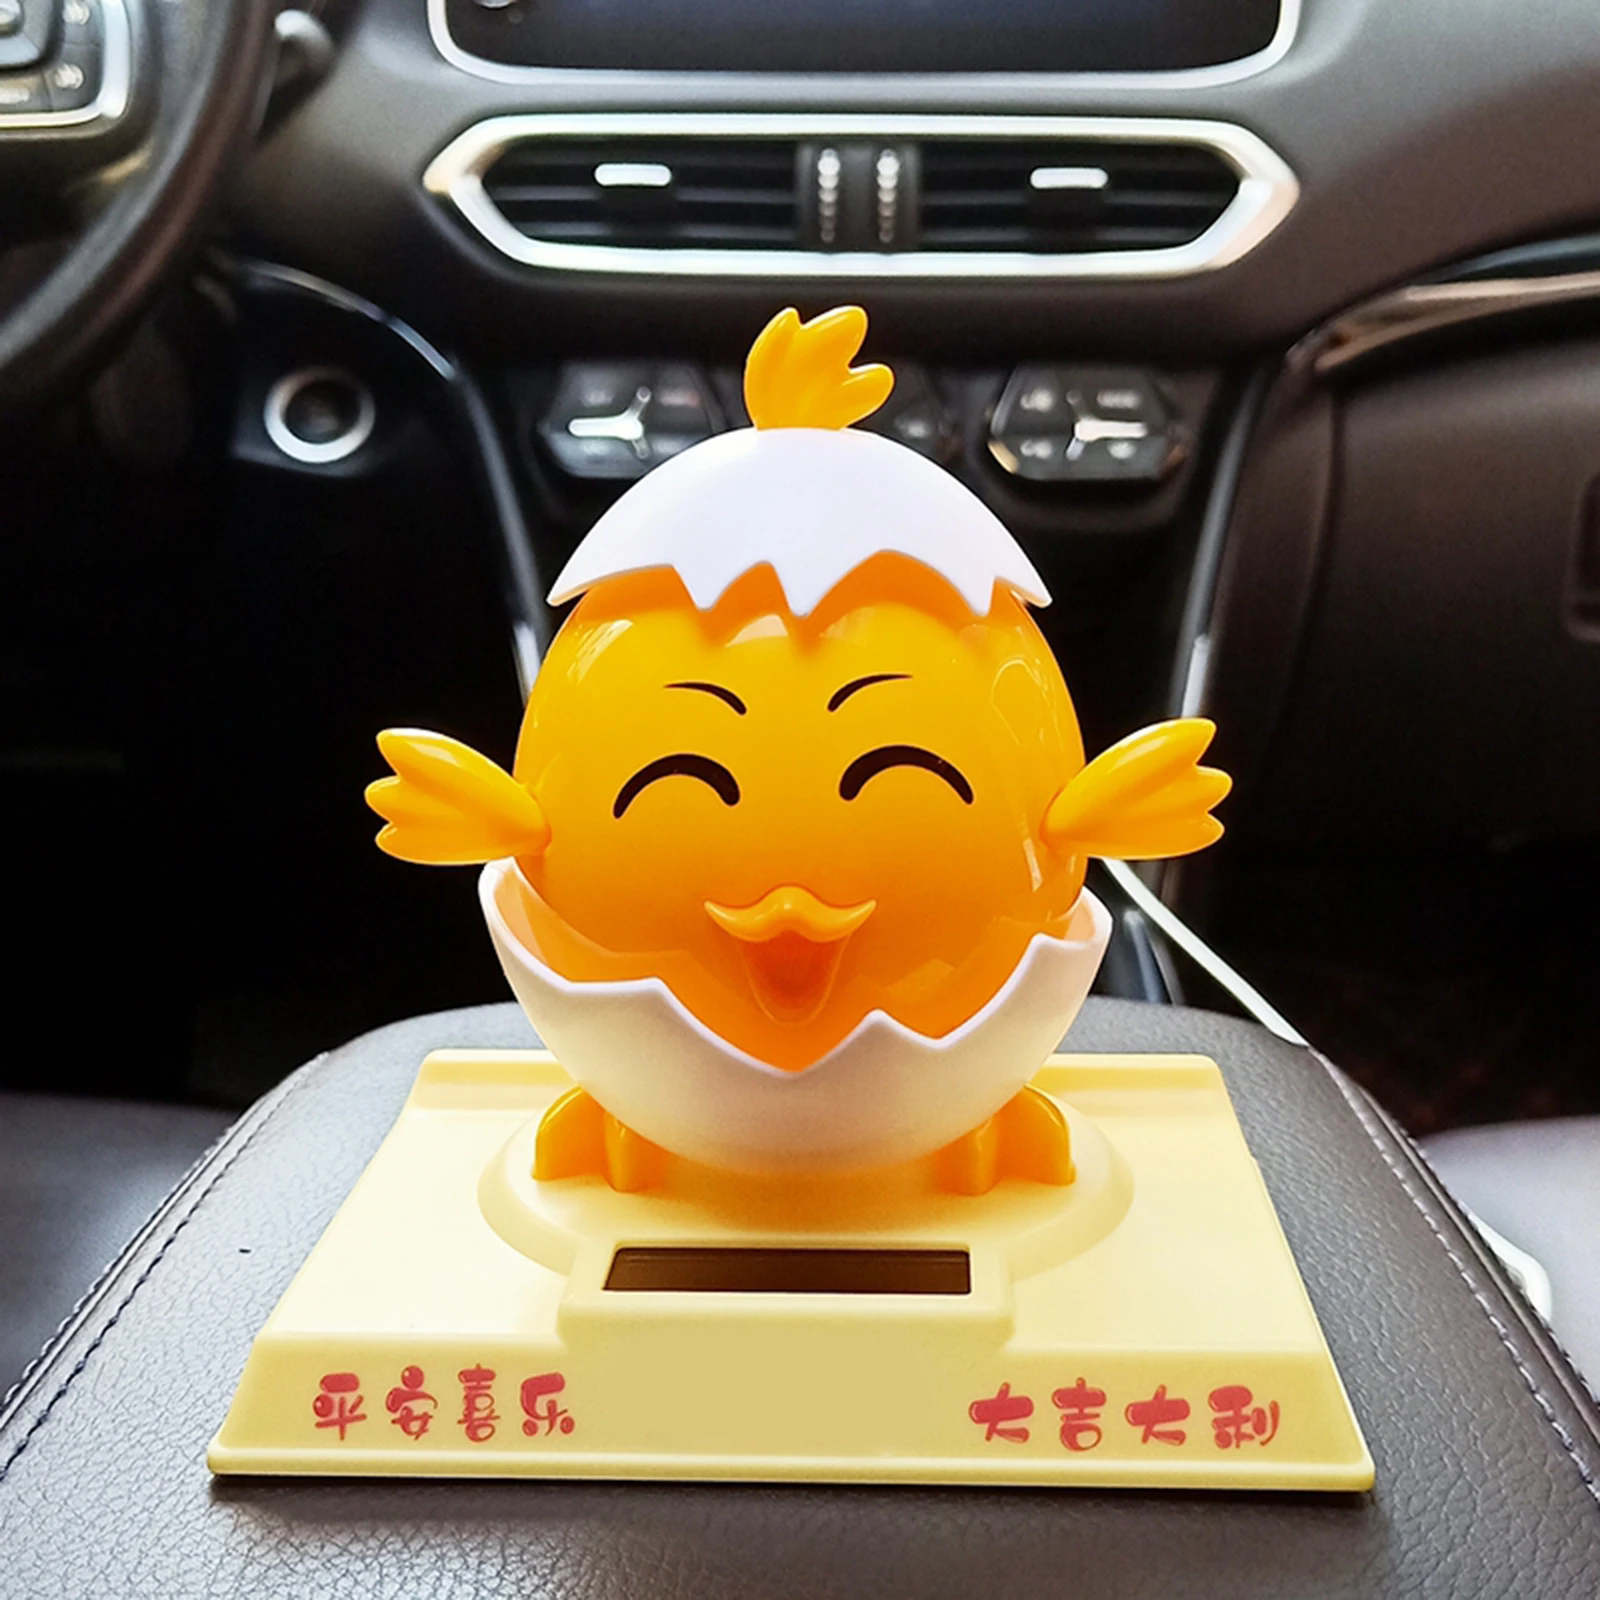 Funny Shaking Head Dancing Little Chick Interior Decoration Bobble Head Doll